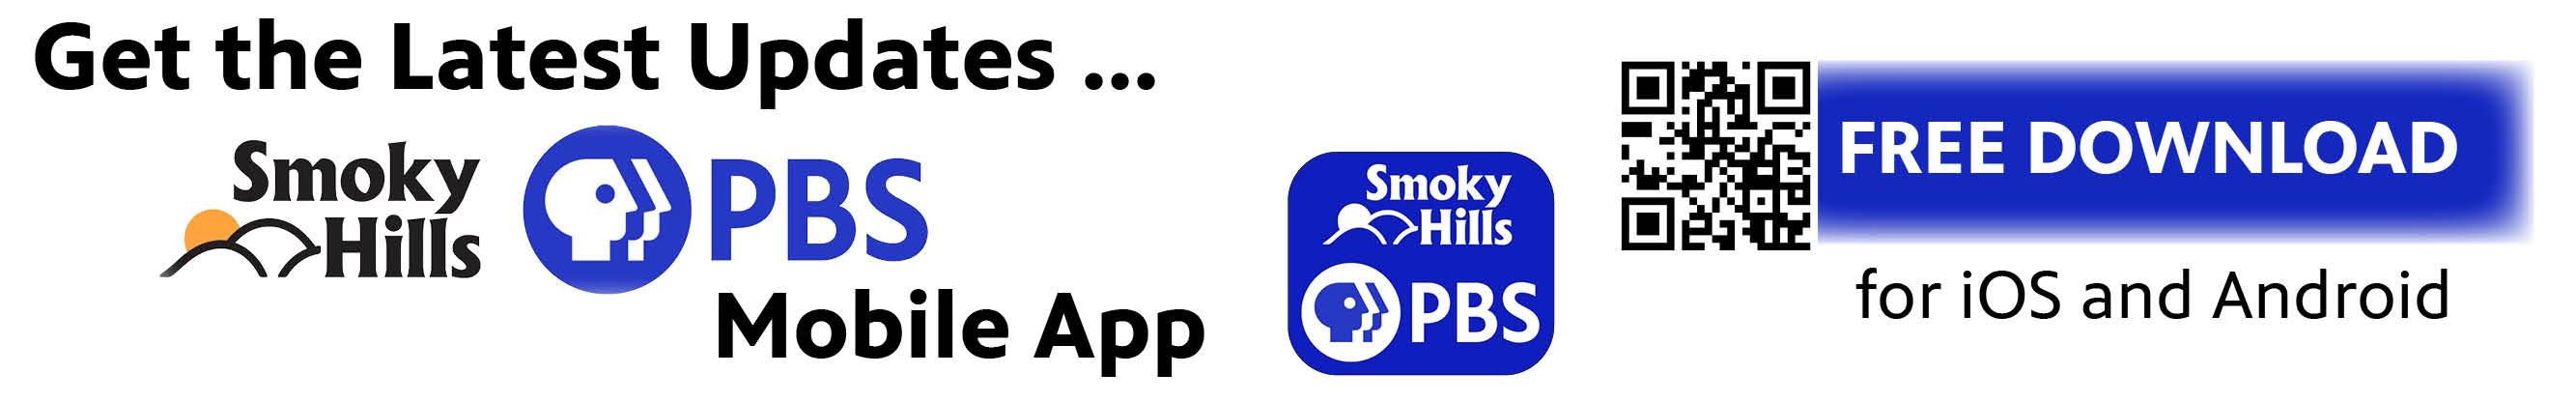 Get the Free Smoky Hills PBS app